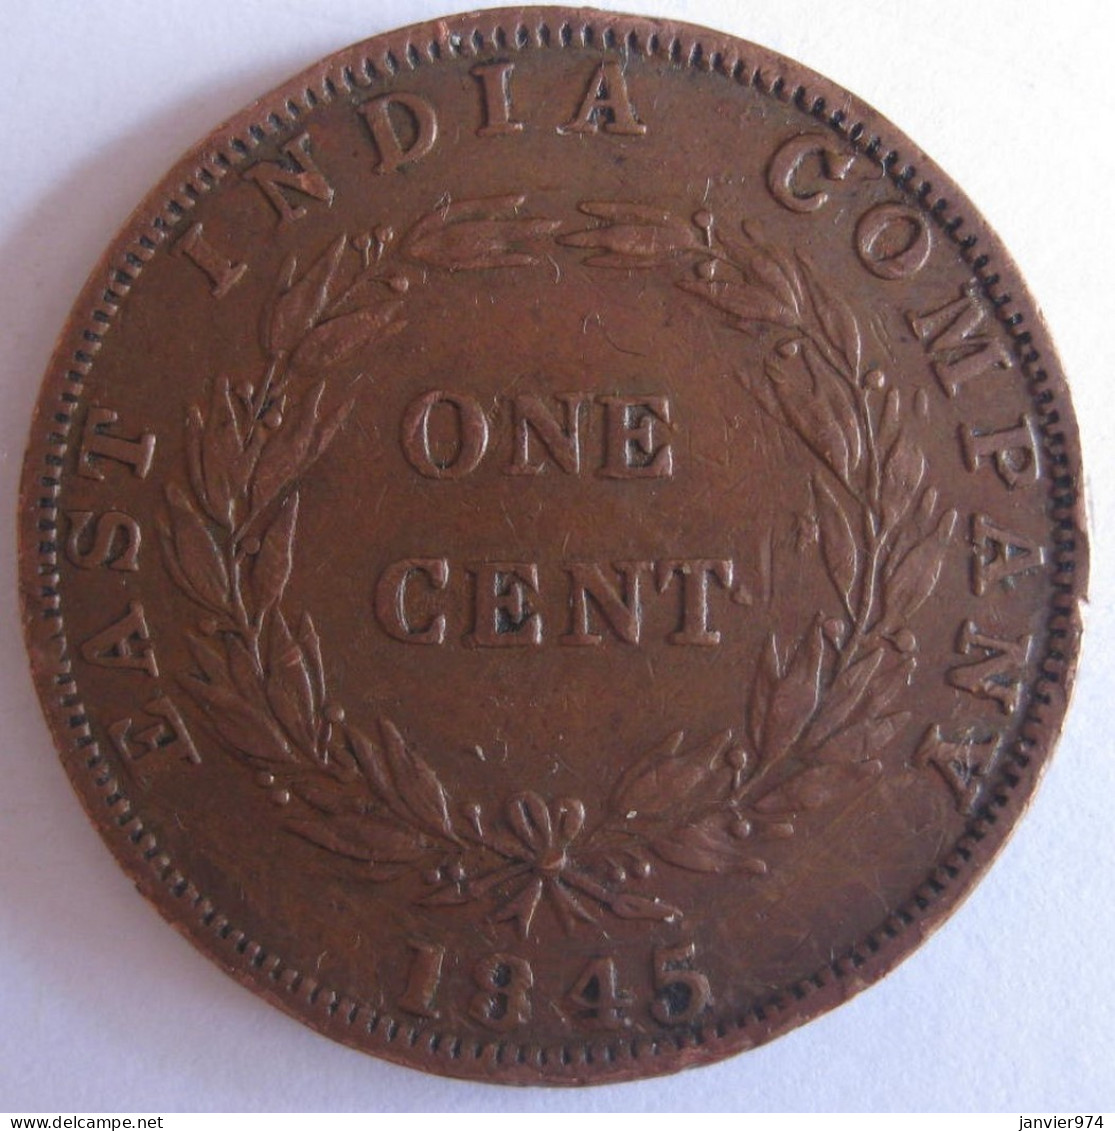 East India Company One Cent 1845. Victoria. Straits Settlements. KM# 3 - Maleisië